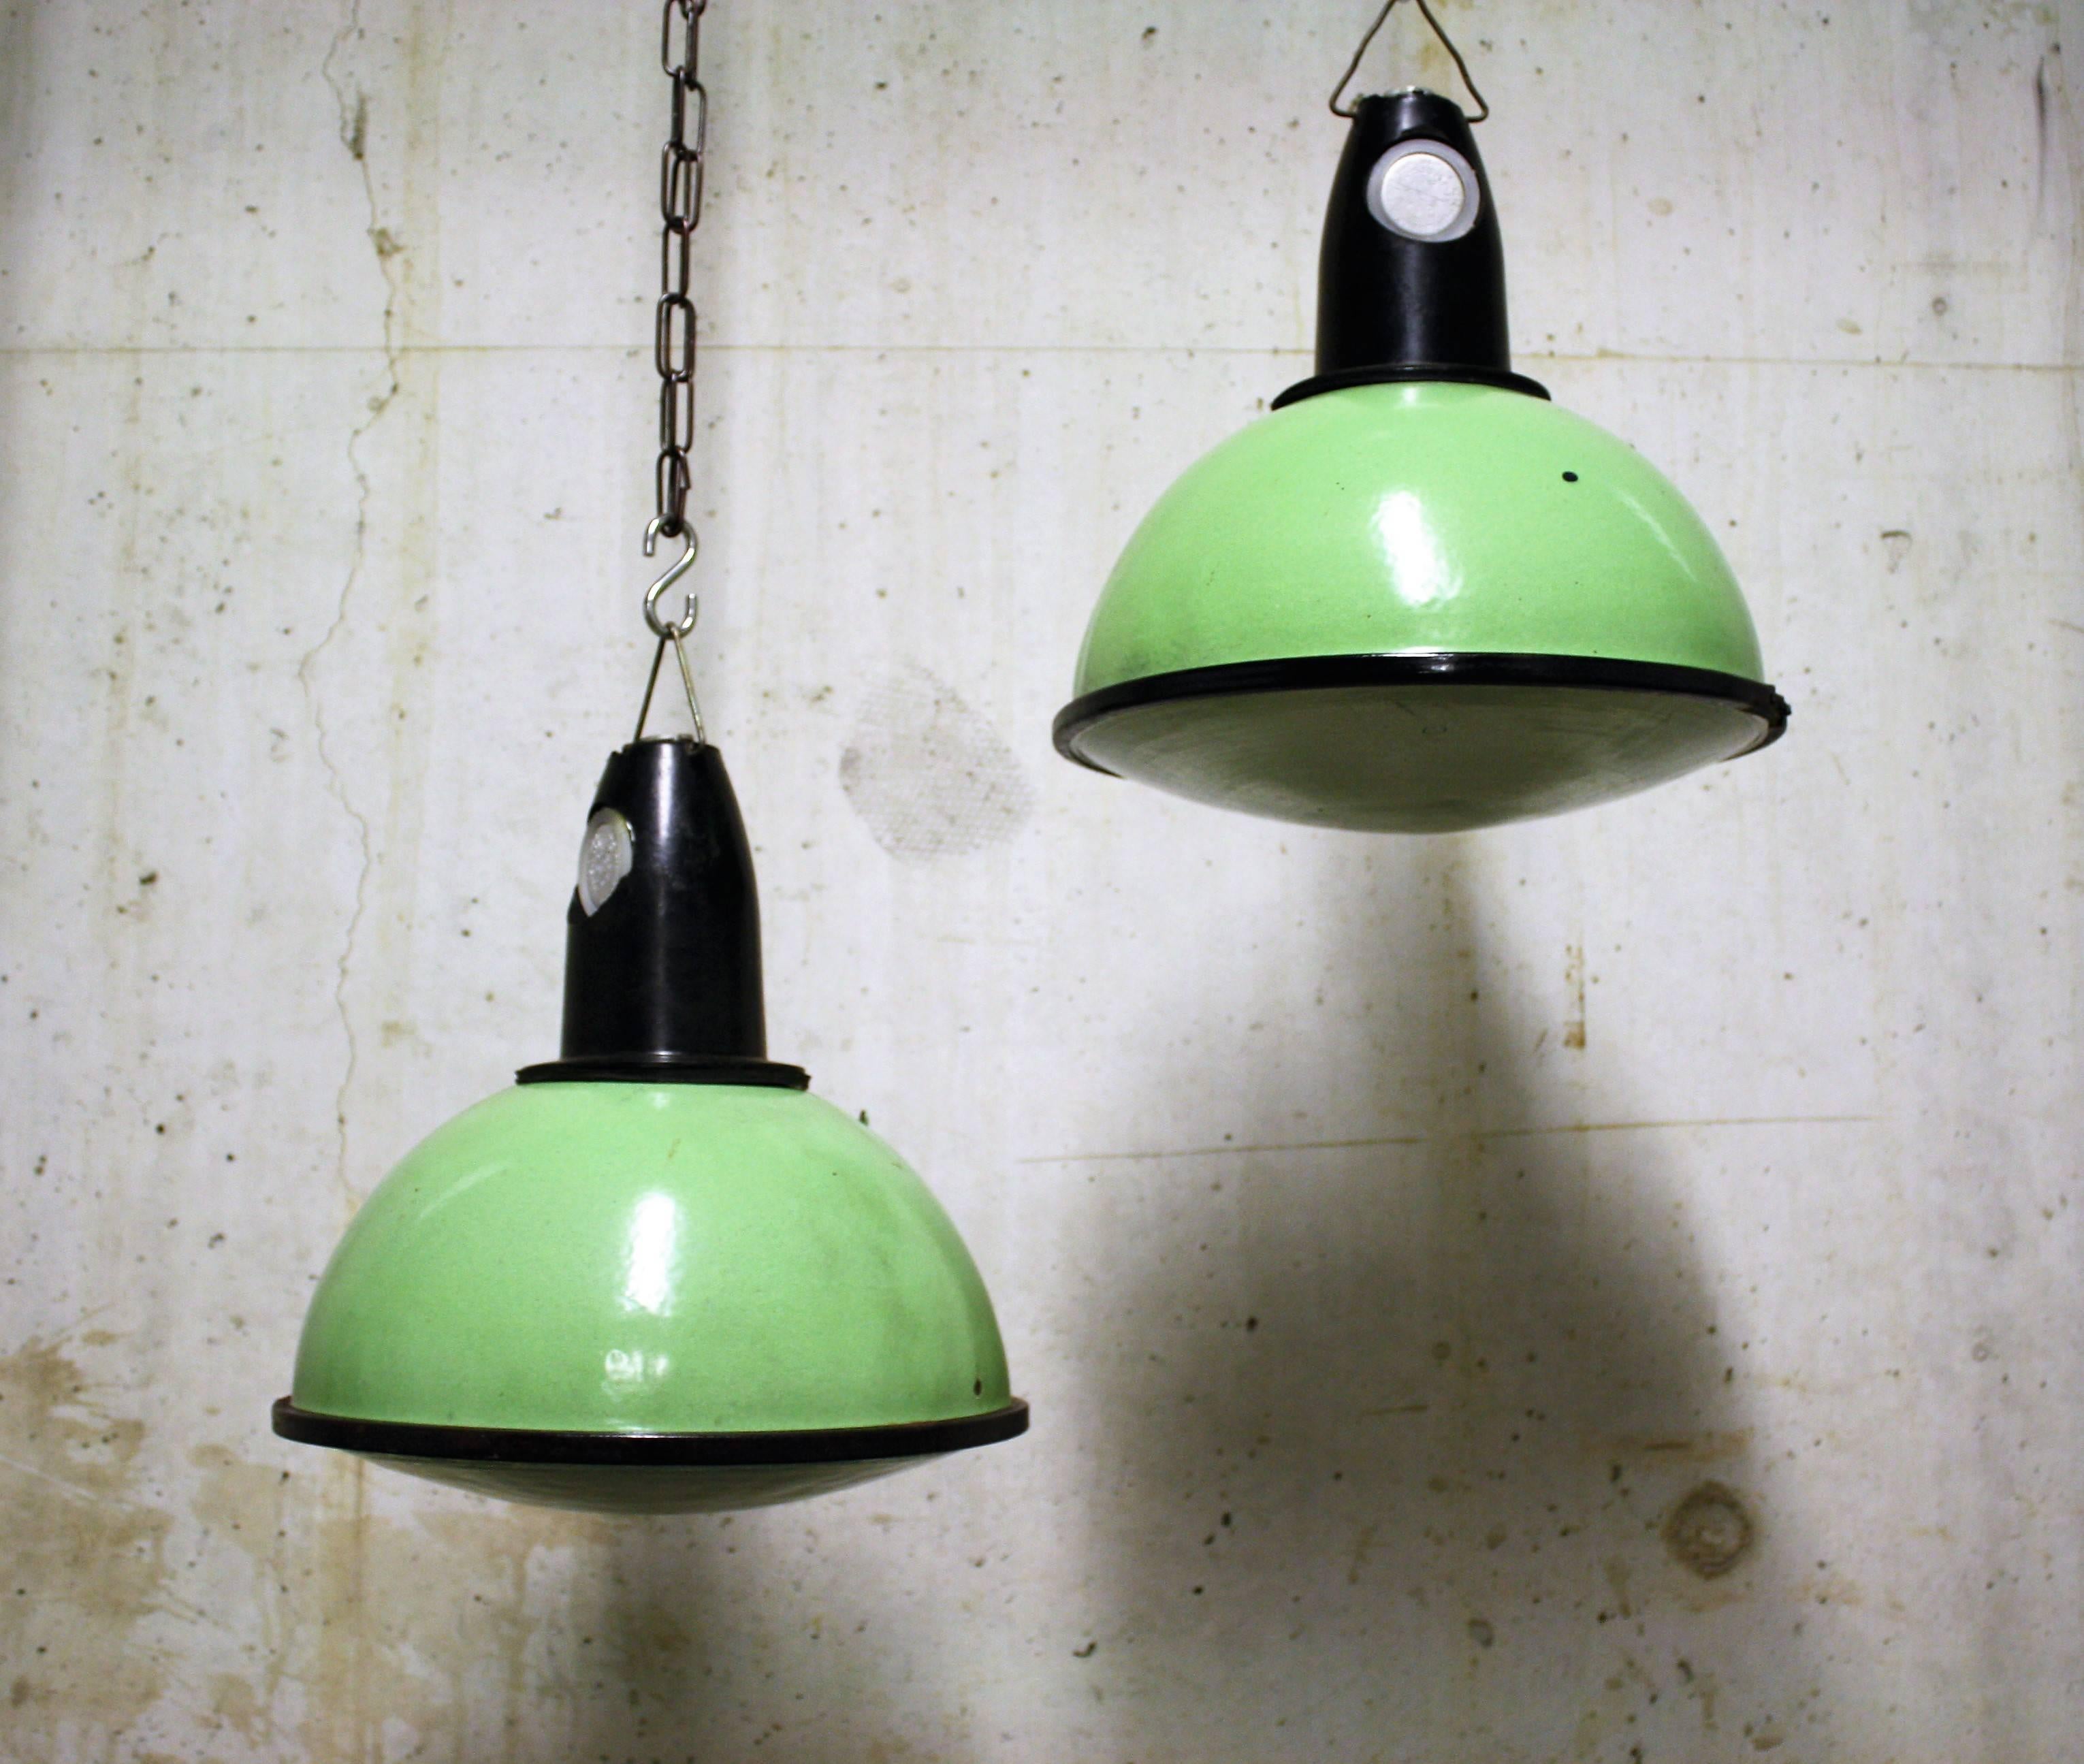 Vintage Industrial pendant lights with glass in green enamel.

These lamps look wonderful in their original green colour, the prismatic glass give a lovely warm feeling once the lamps are illuminated.

The shades are in very good condition, show